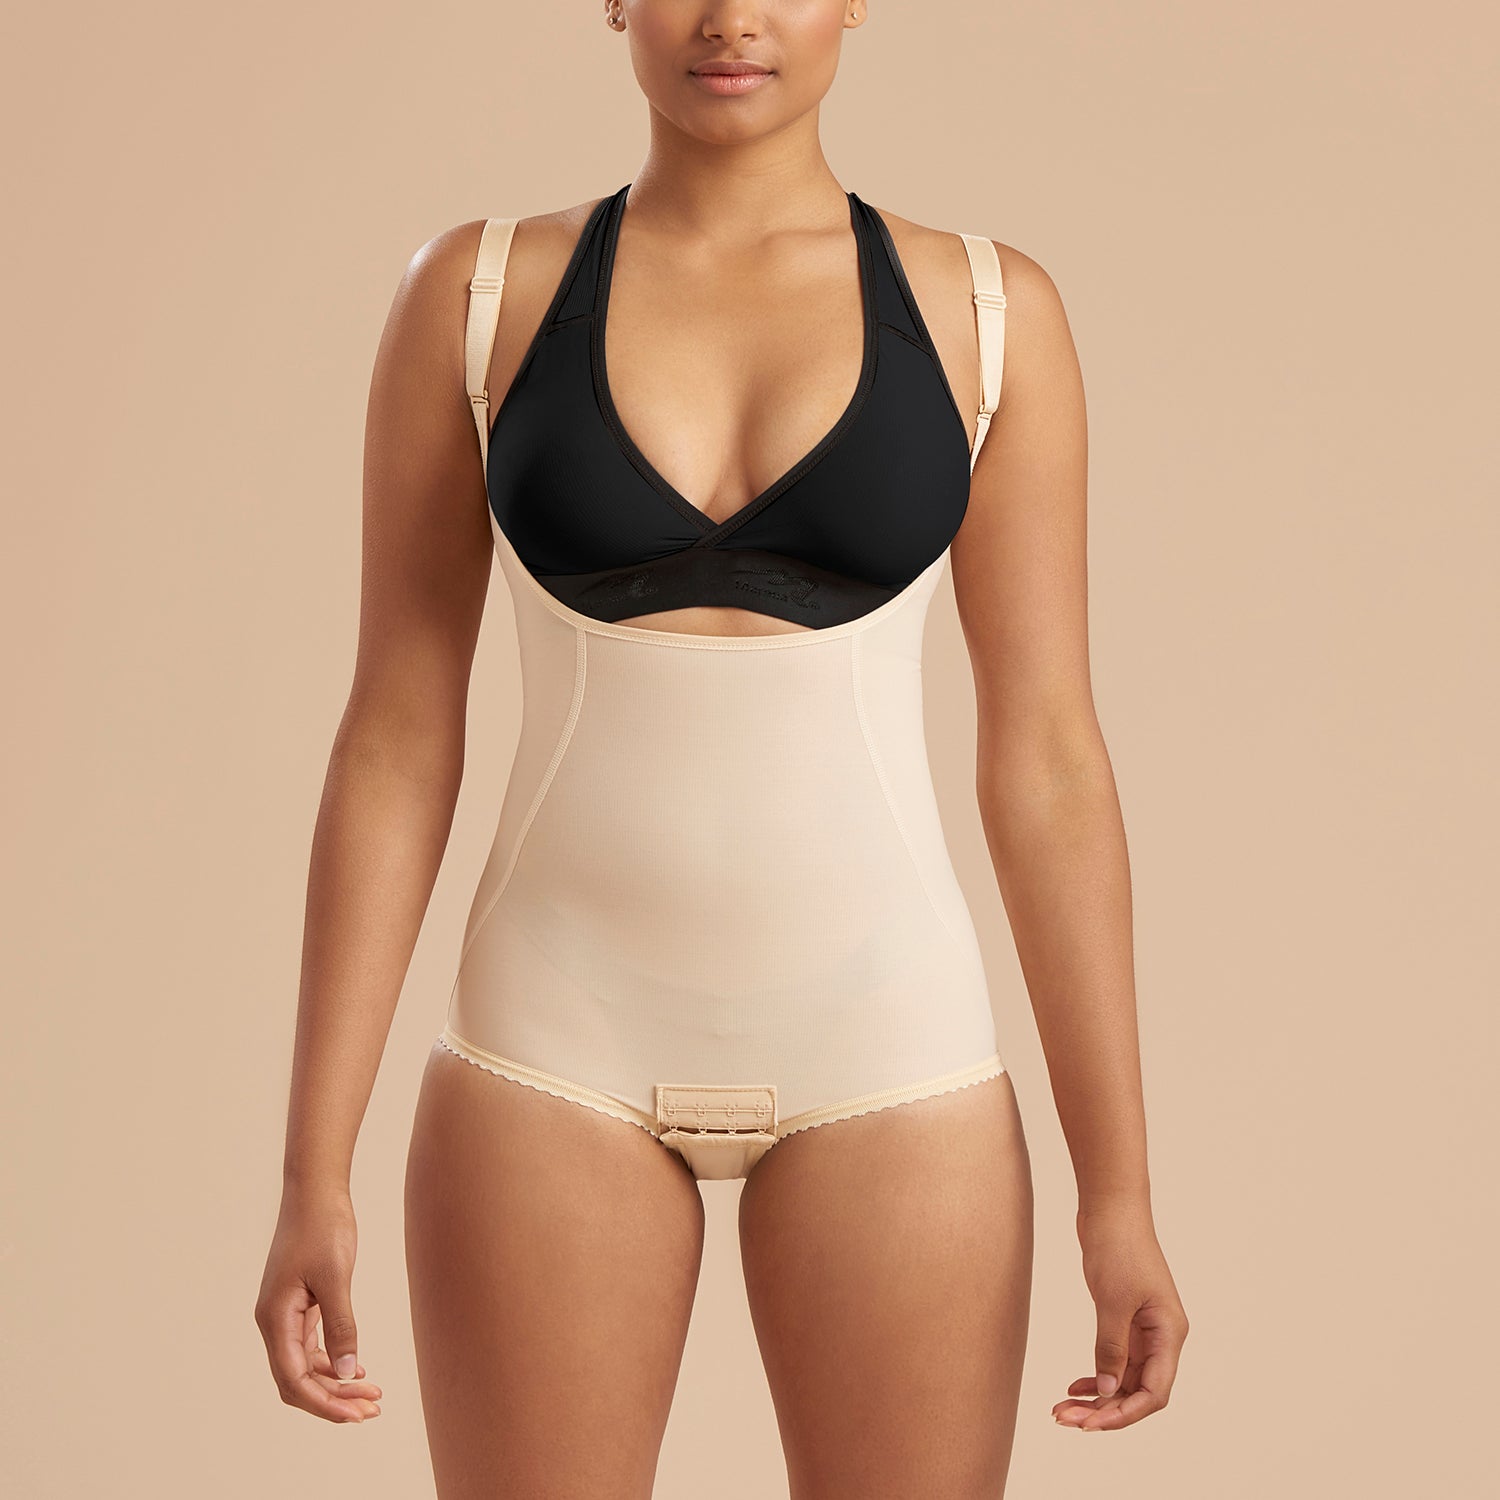 Compression Garments for Plastic Surgery Recovery - The Marena